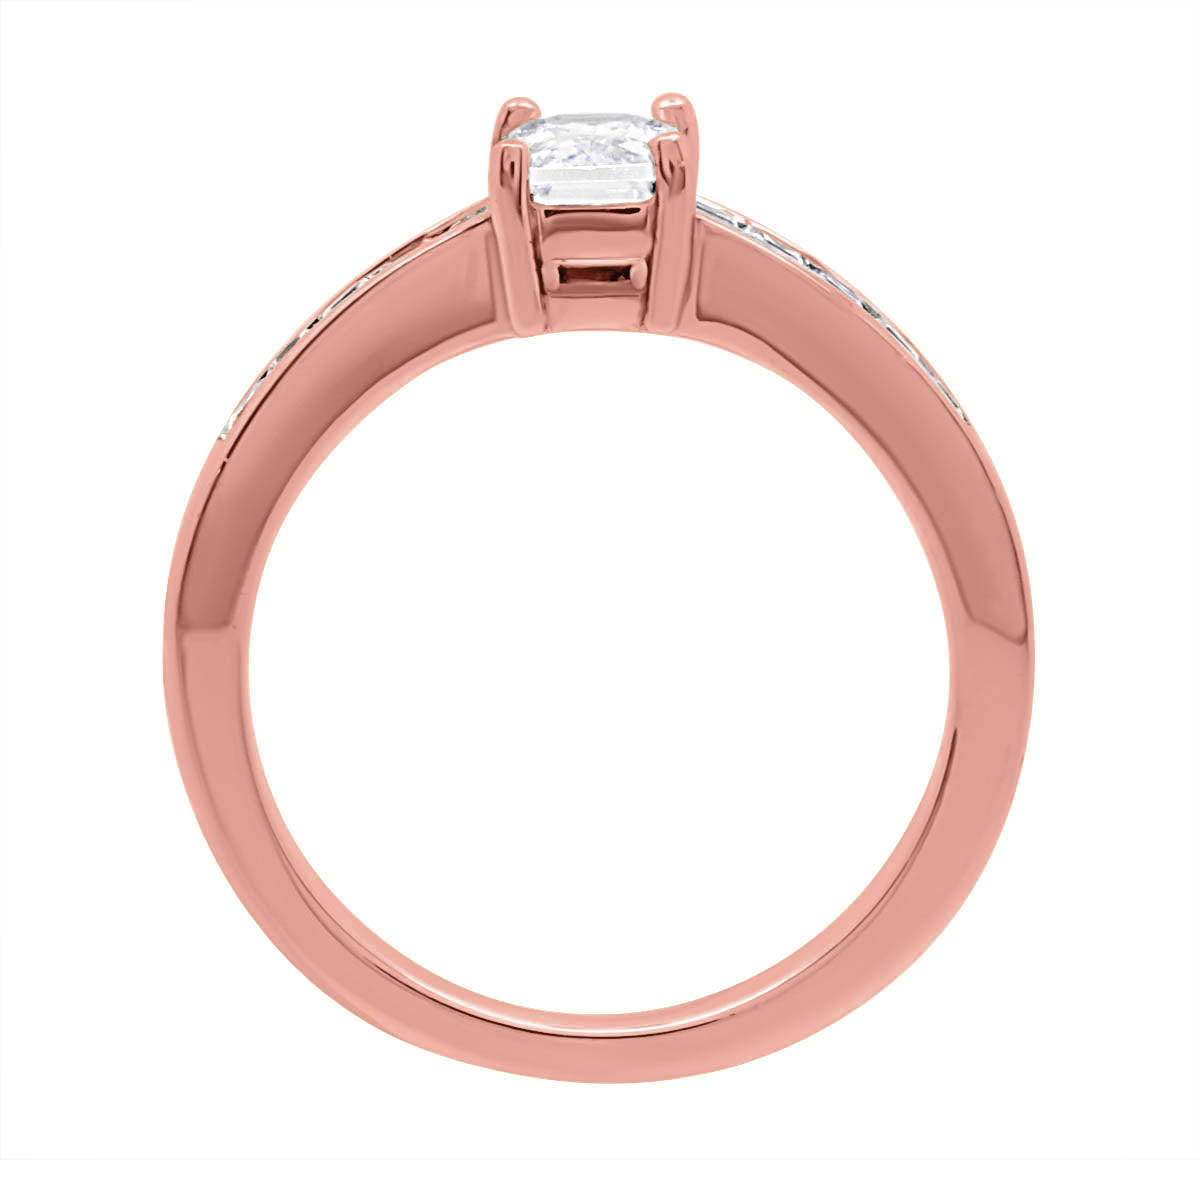 Radiant Cut Engagement Ring in rose gold standing upright